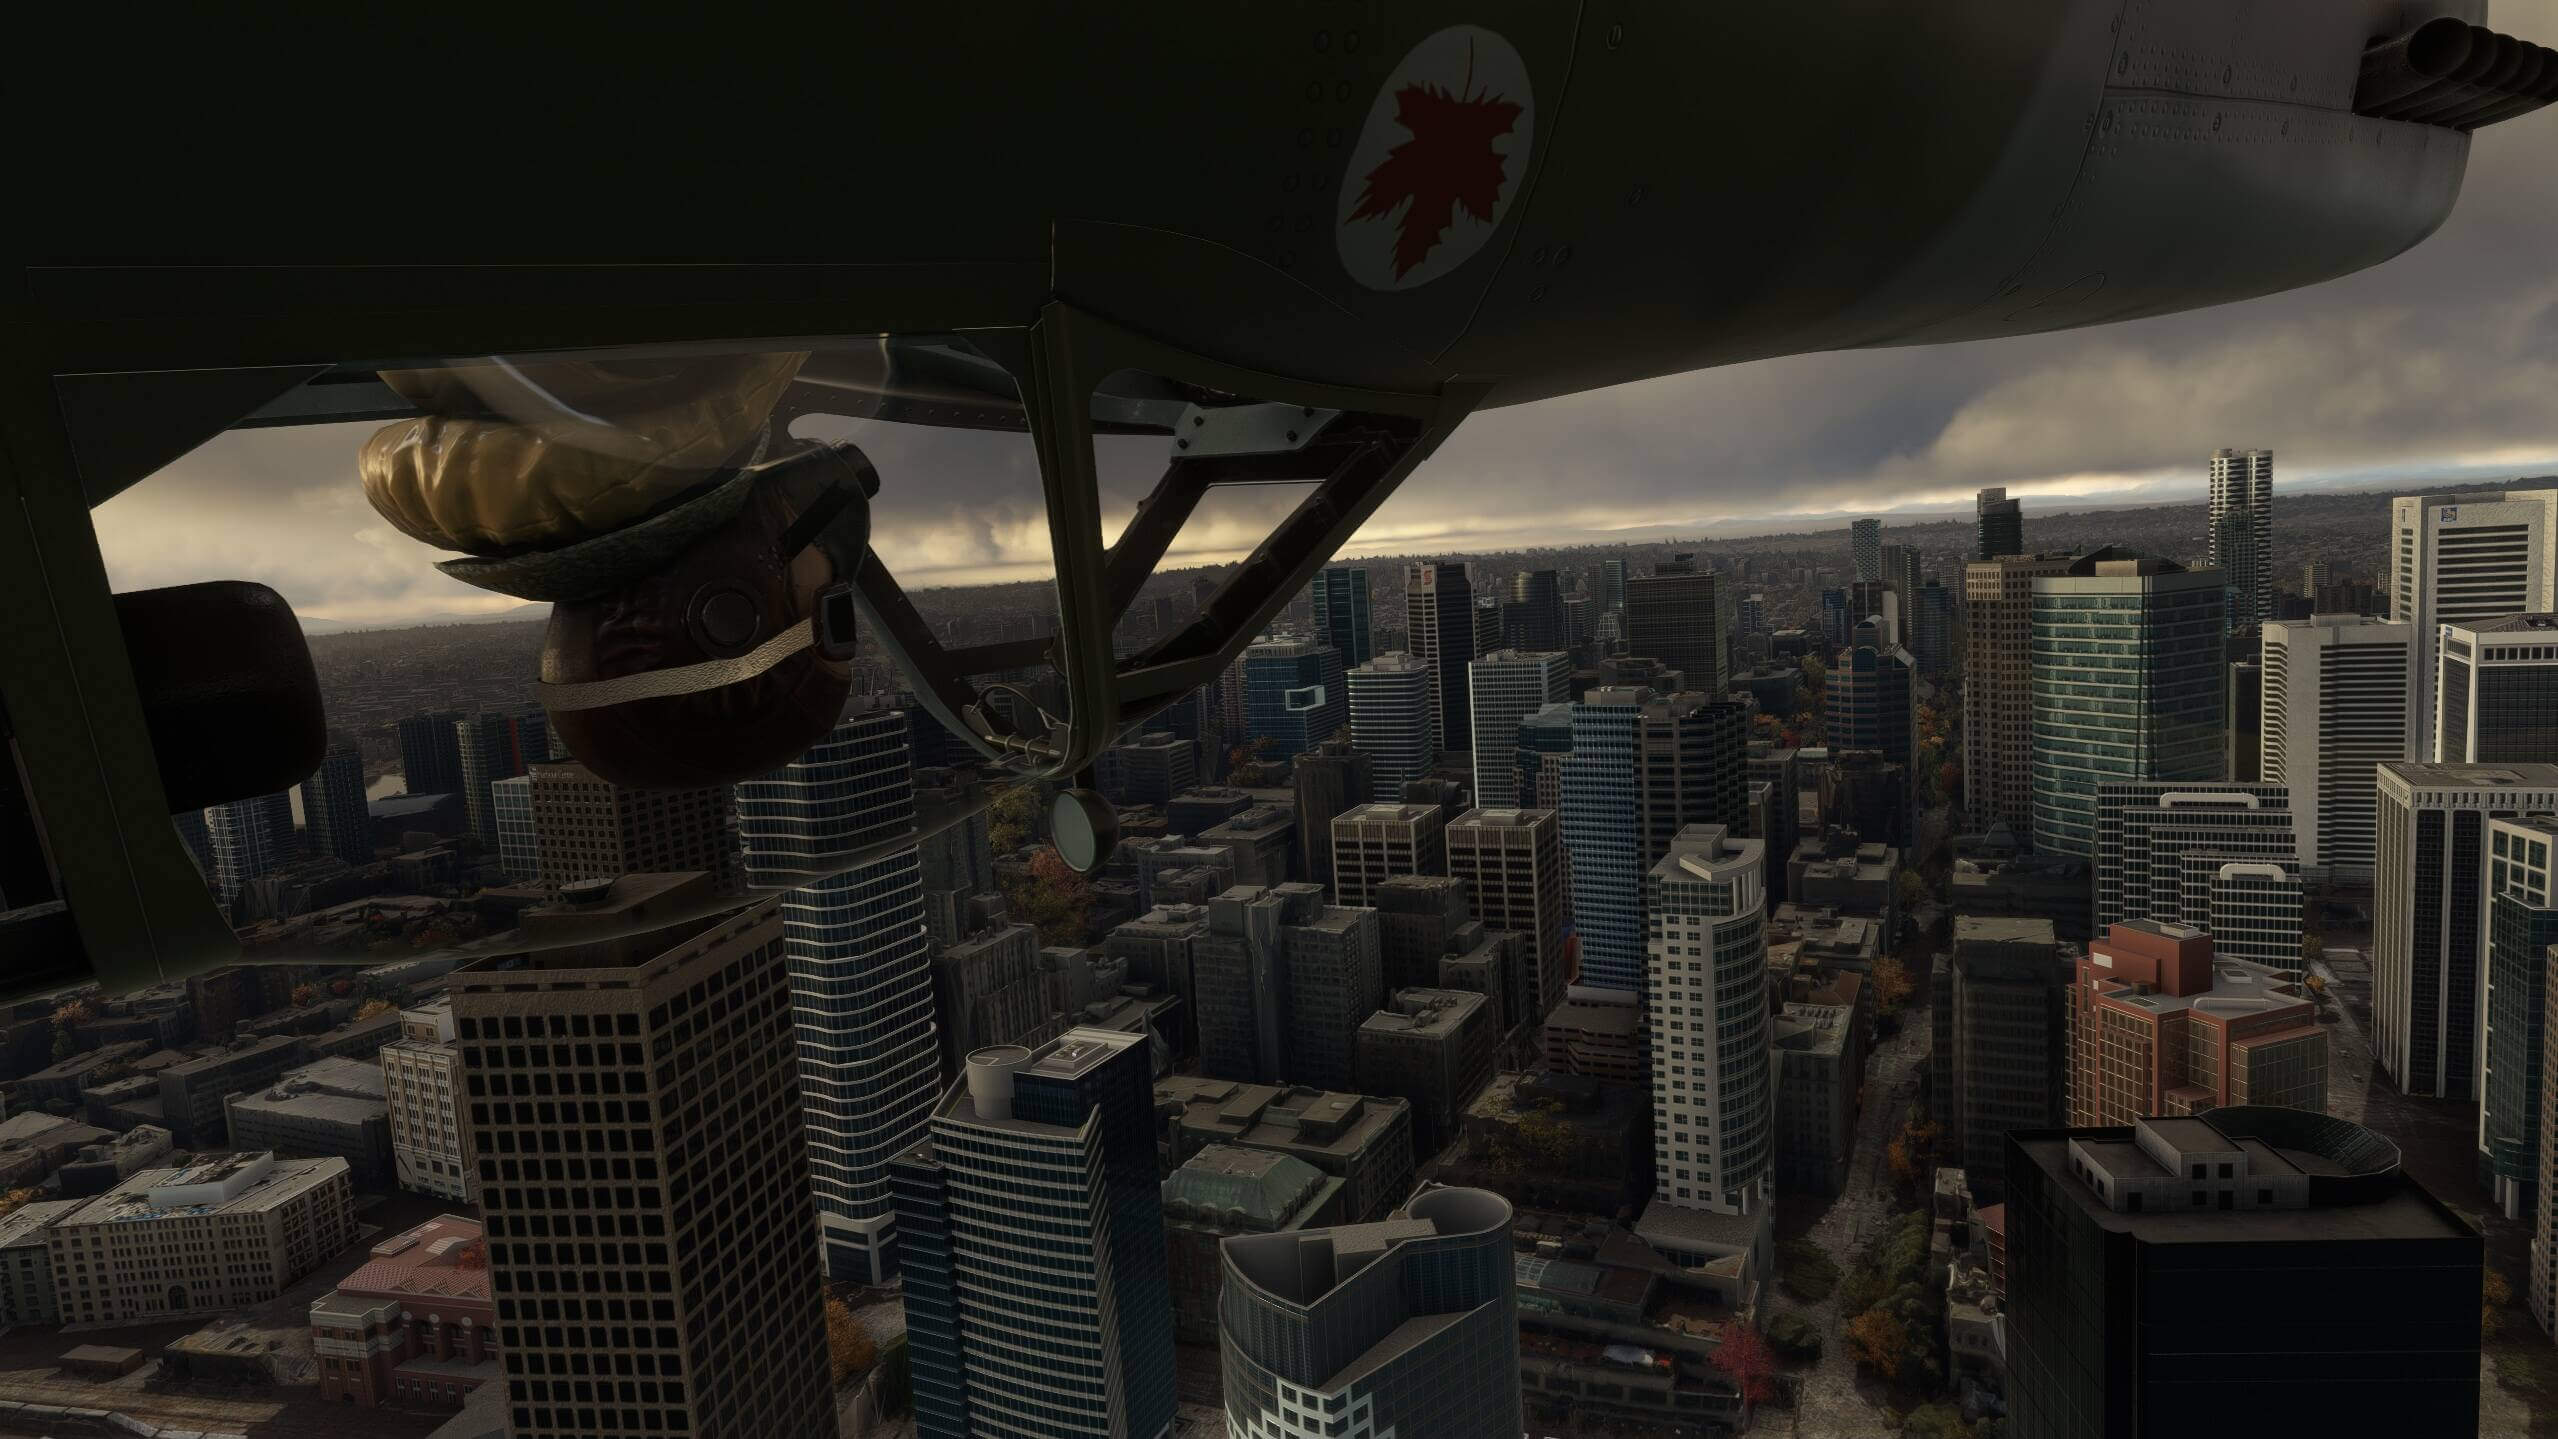 A Canadian warbird flies inverted over a city skyline with the pilot in view inside the canopy looking forward.